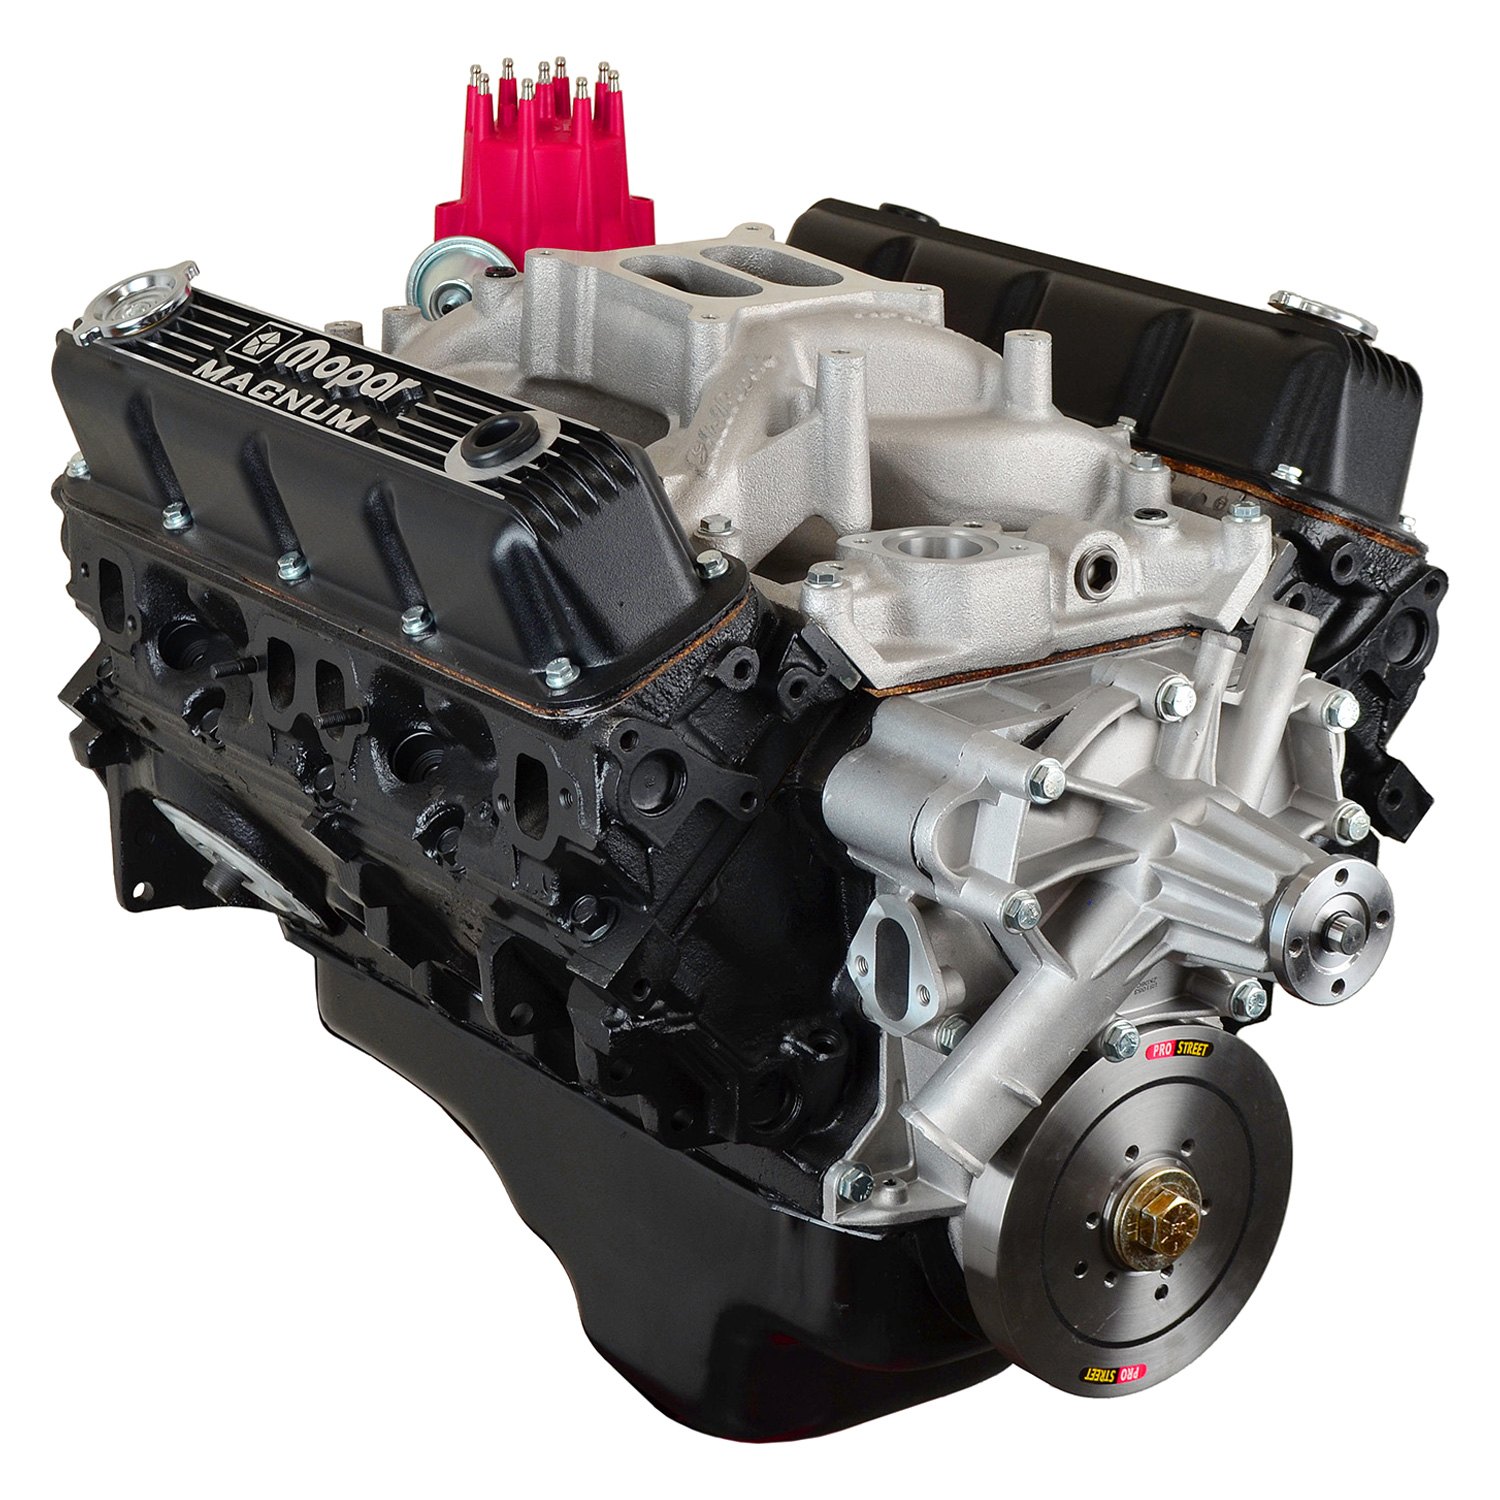 Replace ® HP73M - 320HP 360 Magnum Mid Dress Engine (Chrysler Small Block V...